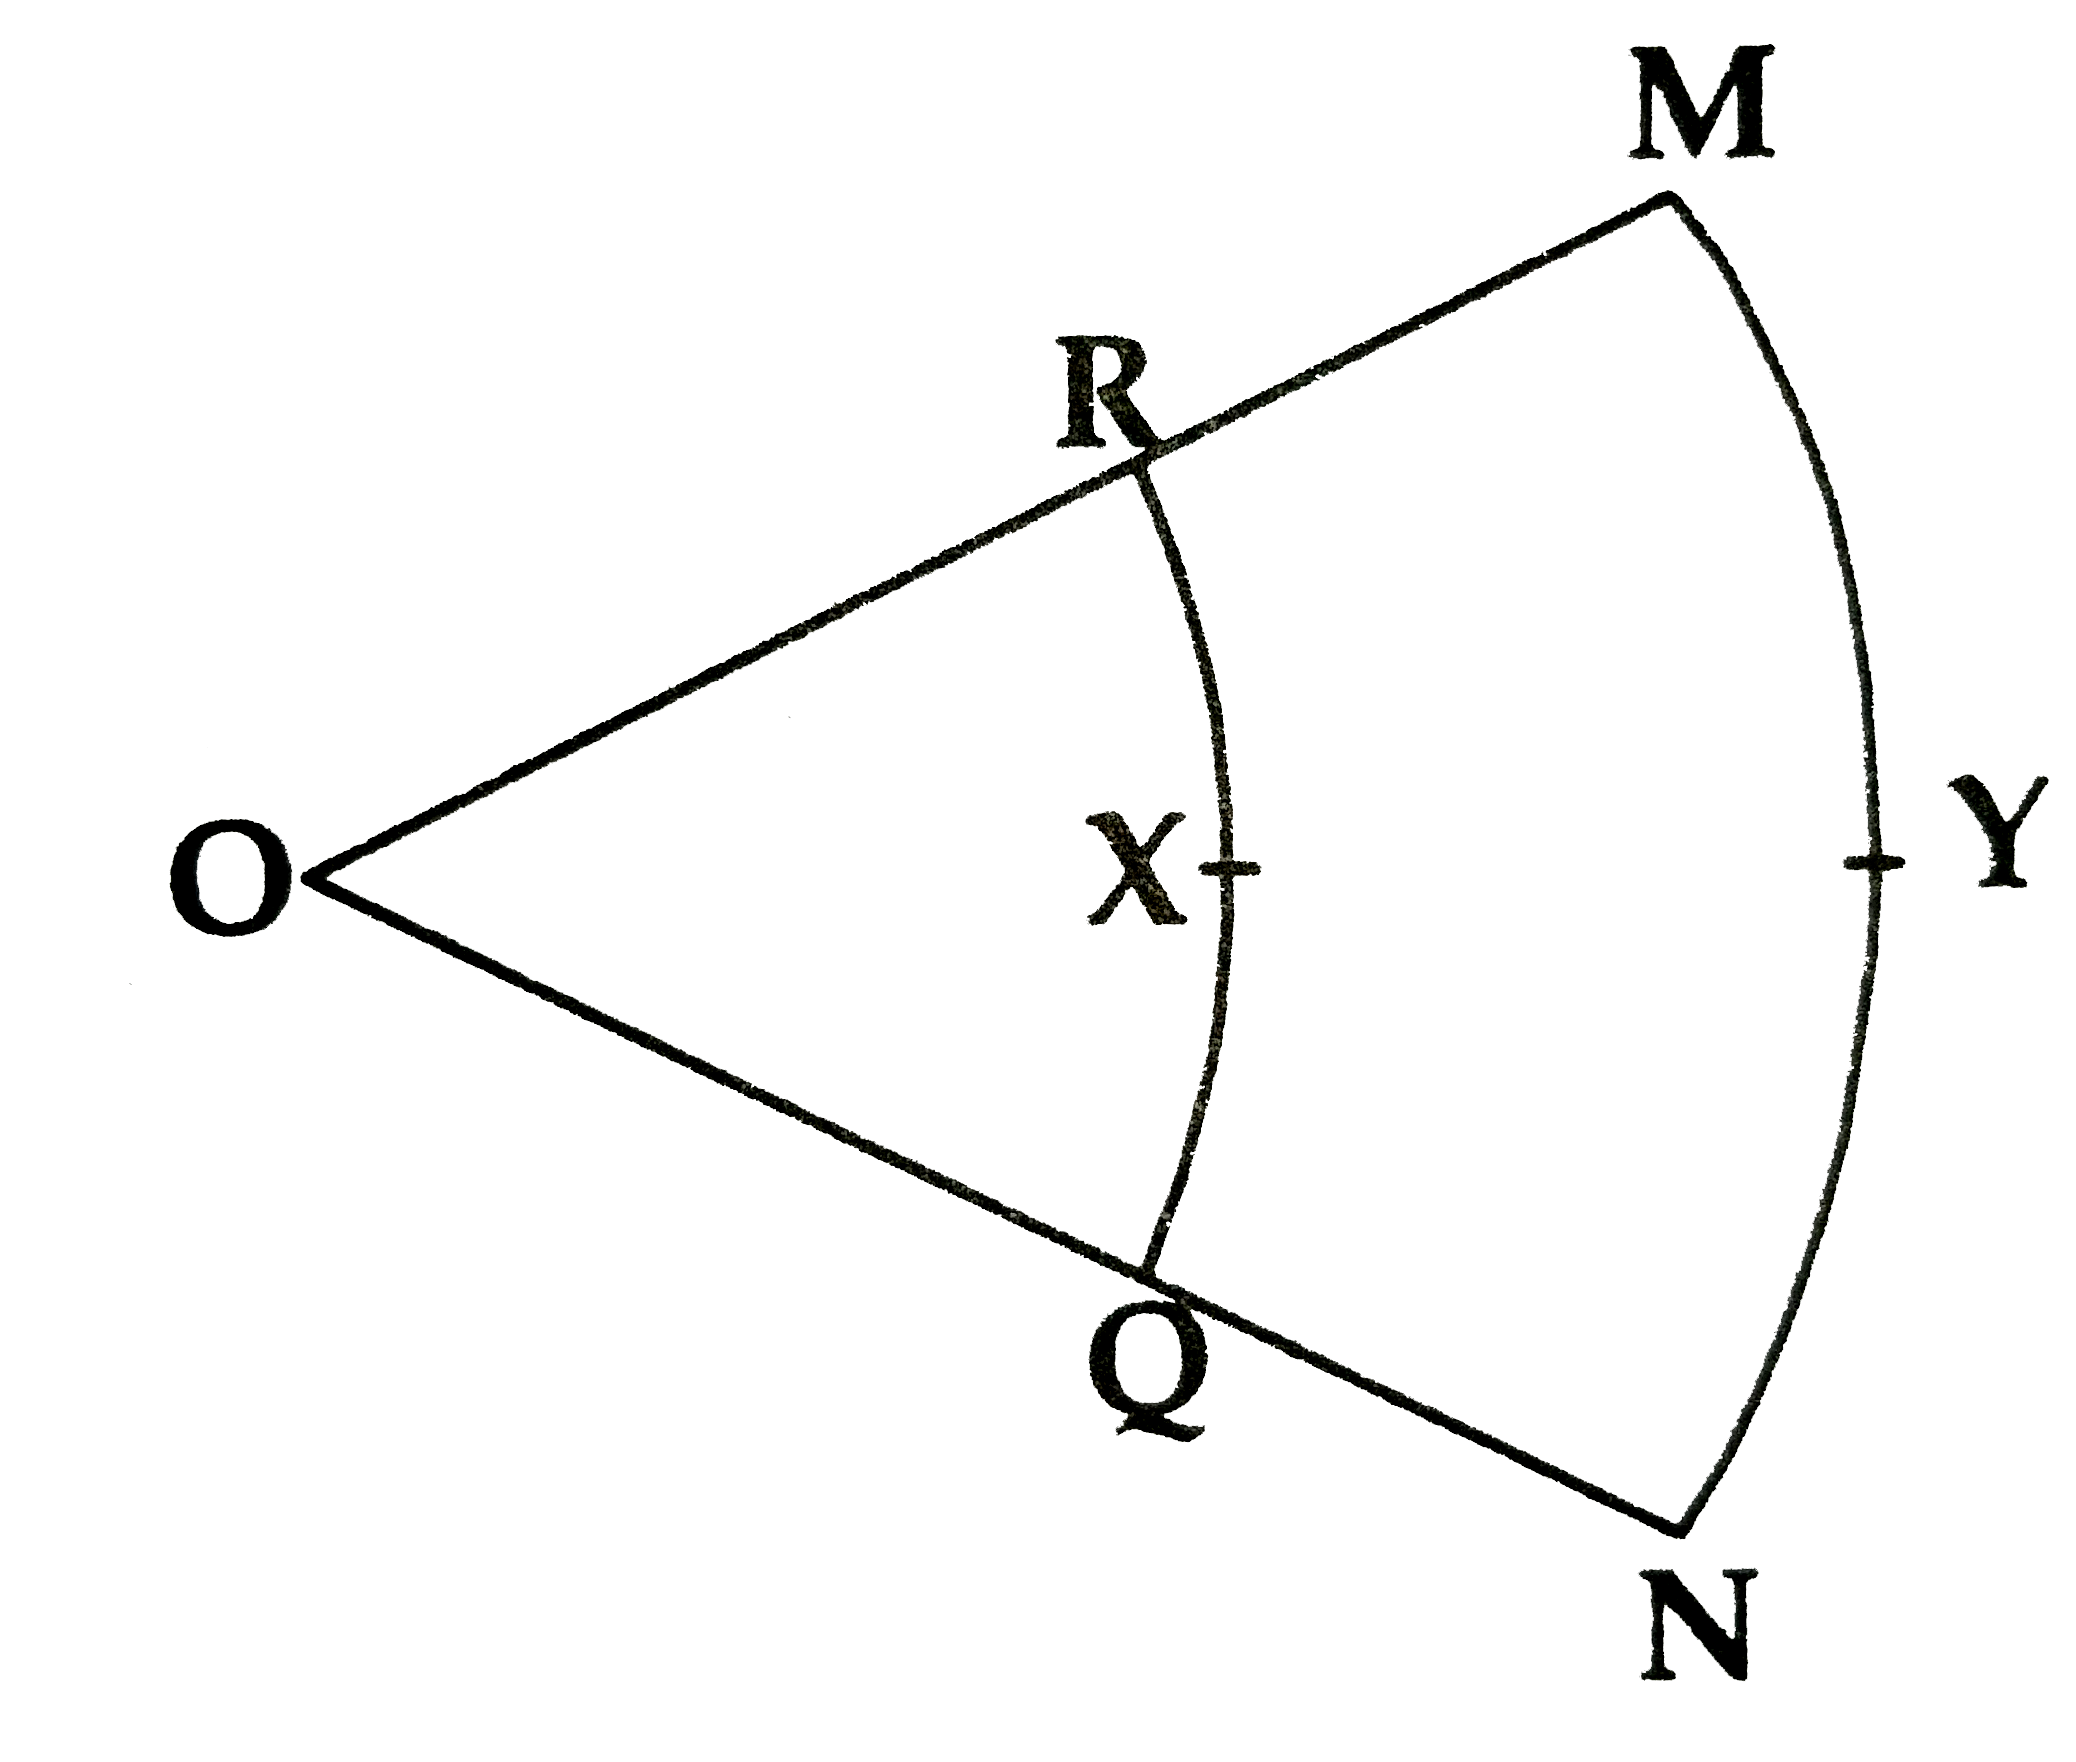 In the given figure, O is the center of three sector. angleROQ= angleMNO =60^@   OR =7 cm and OM =21 cm.   Find the lenghts of  arc RXQ and arc MYN.     (pi=22/7)   Given: angleROQ=angleMON =theta=60^(@)   OR=r(1)=7cm, ON=r(2)=21 cm, pi=22/7   To find: l(arc RXQ), l(arc MYN)